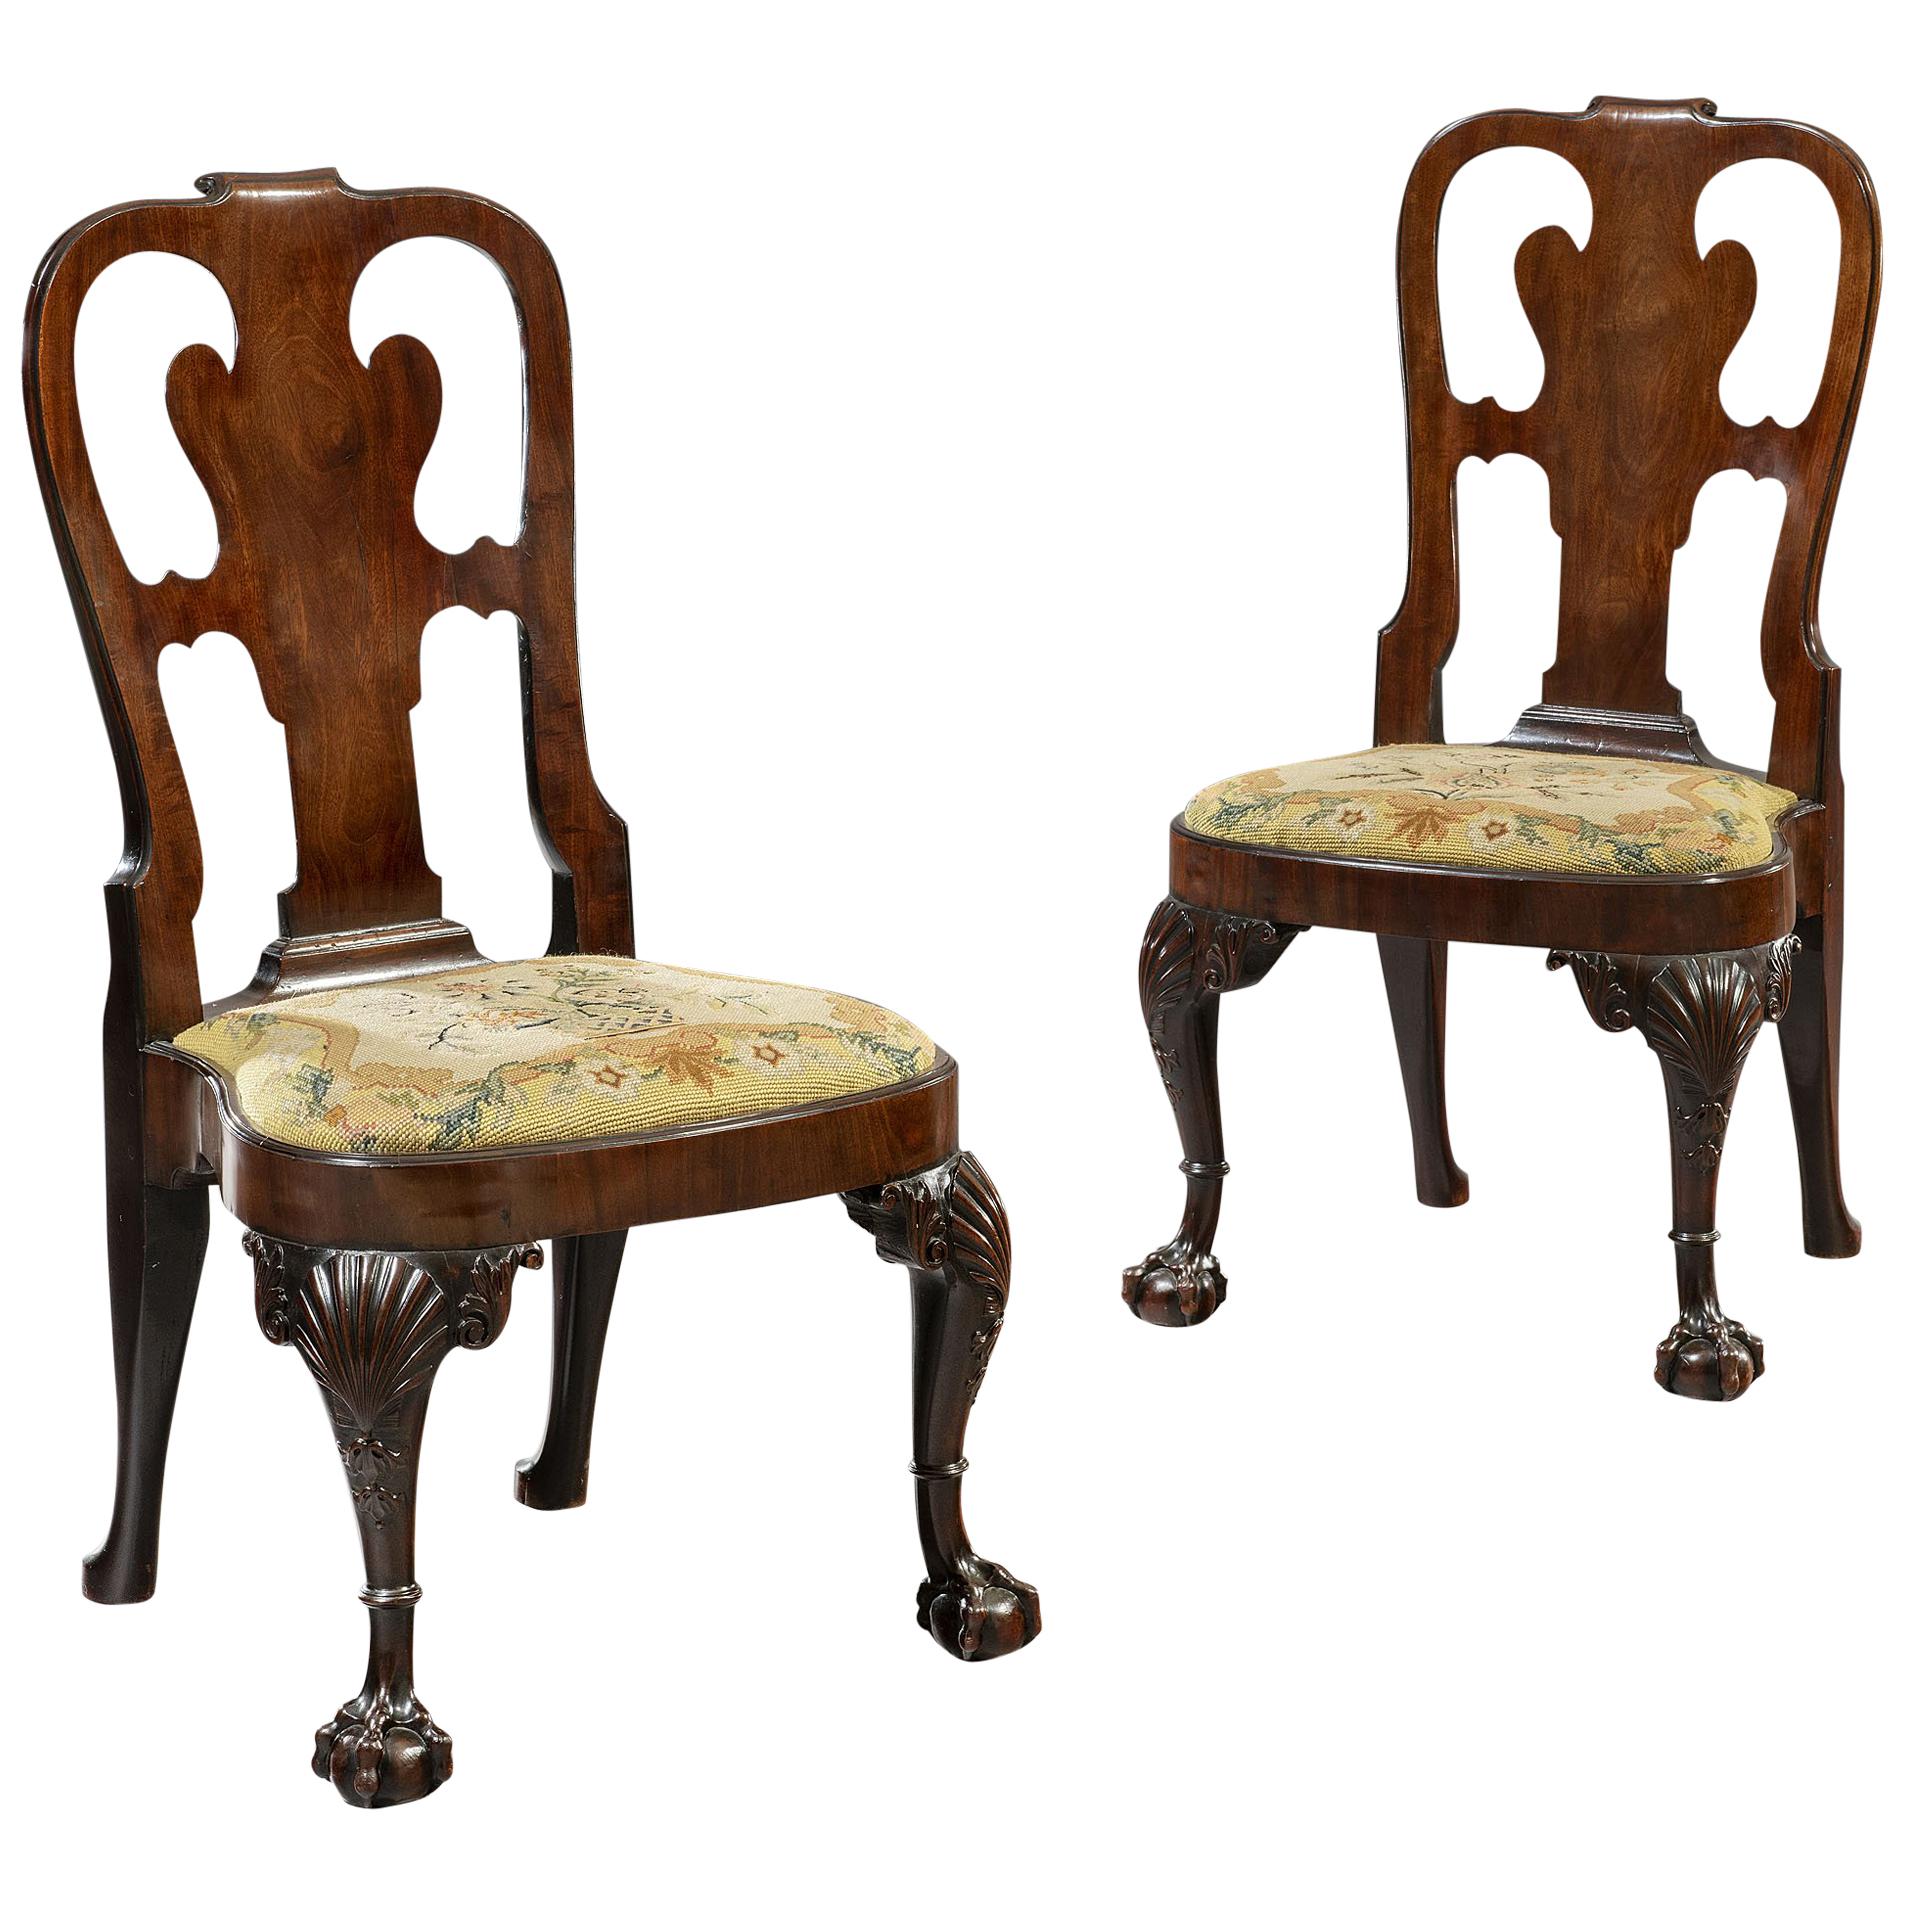 Pair of George II Period 18th Century Carved Cuban Mahogany Side Chairs